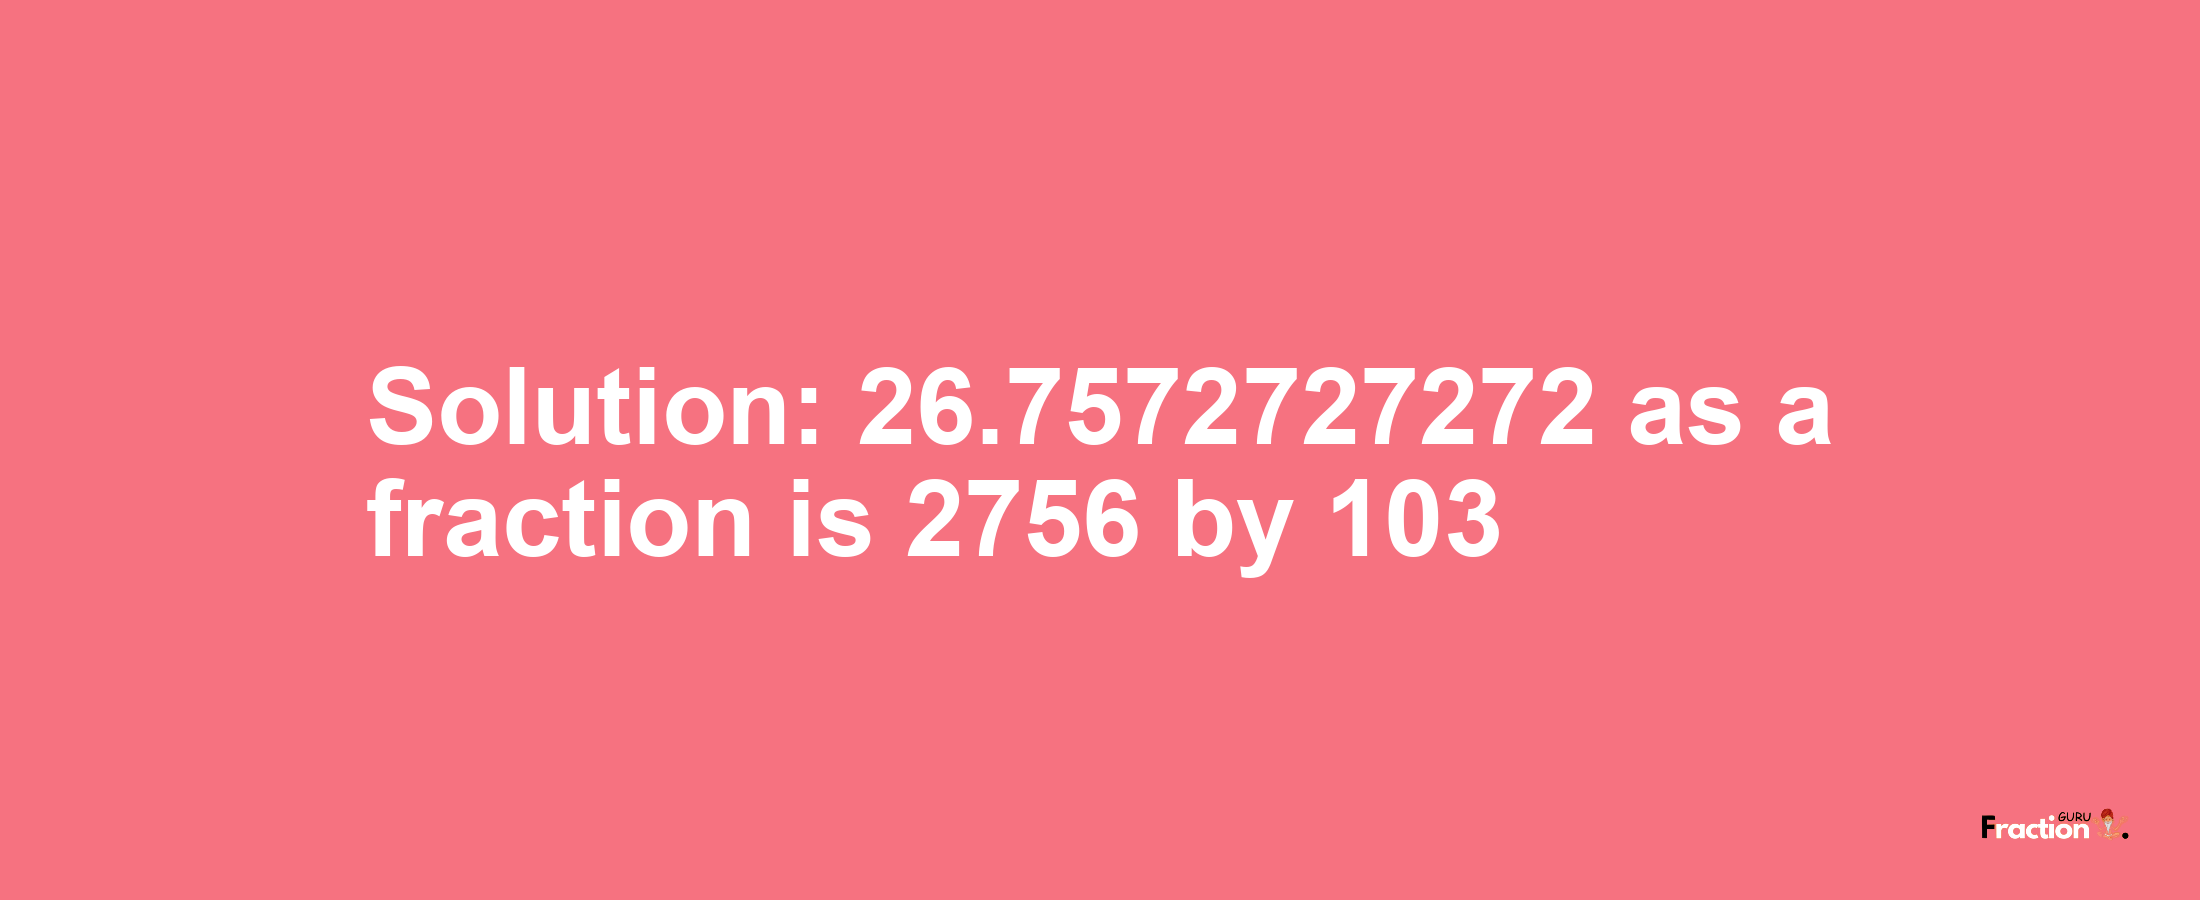 Solution:26.7572727272 as a fraction is 2756/103